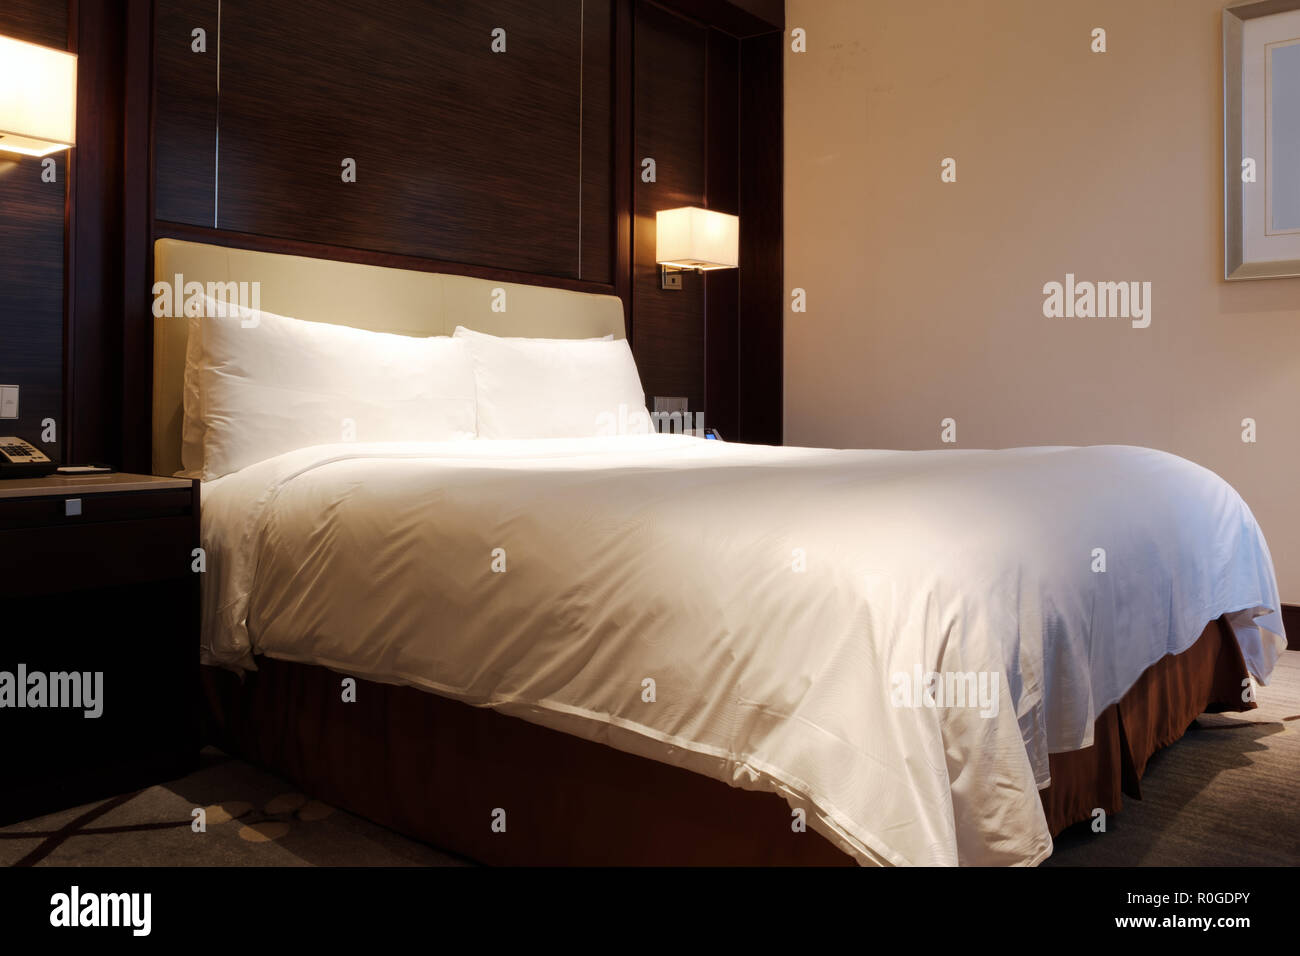 Standard king size beds hotel room Stock Photo